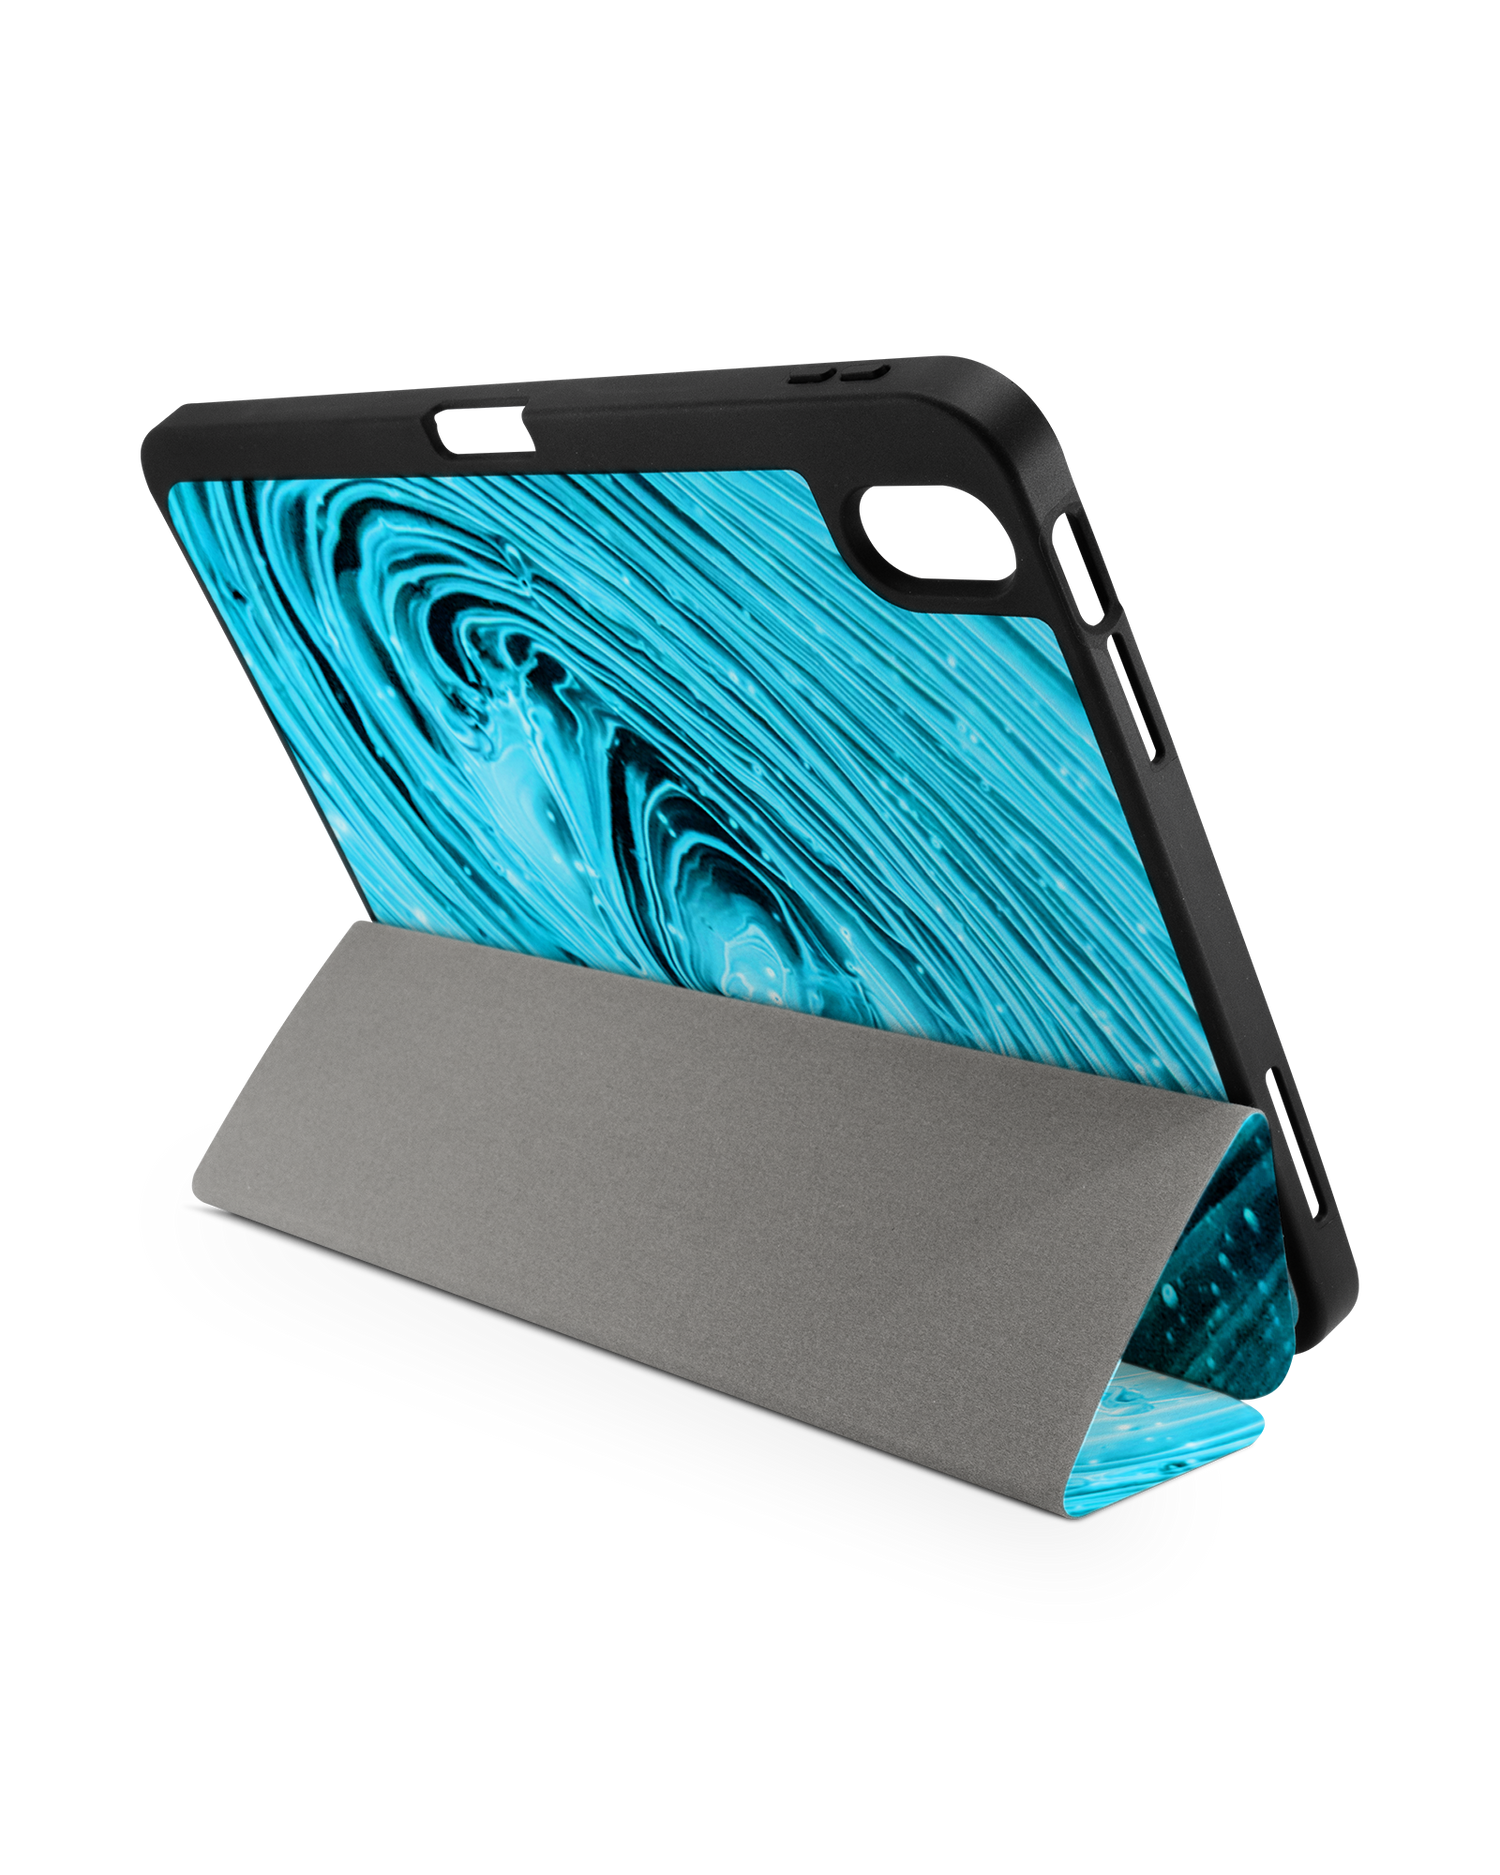 Turquoise Ripples iPad Case with Pencil Holder for Apple iPad (10th Generation): Set up in landscape format (back view)